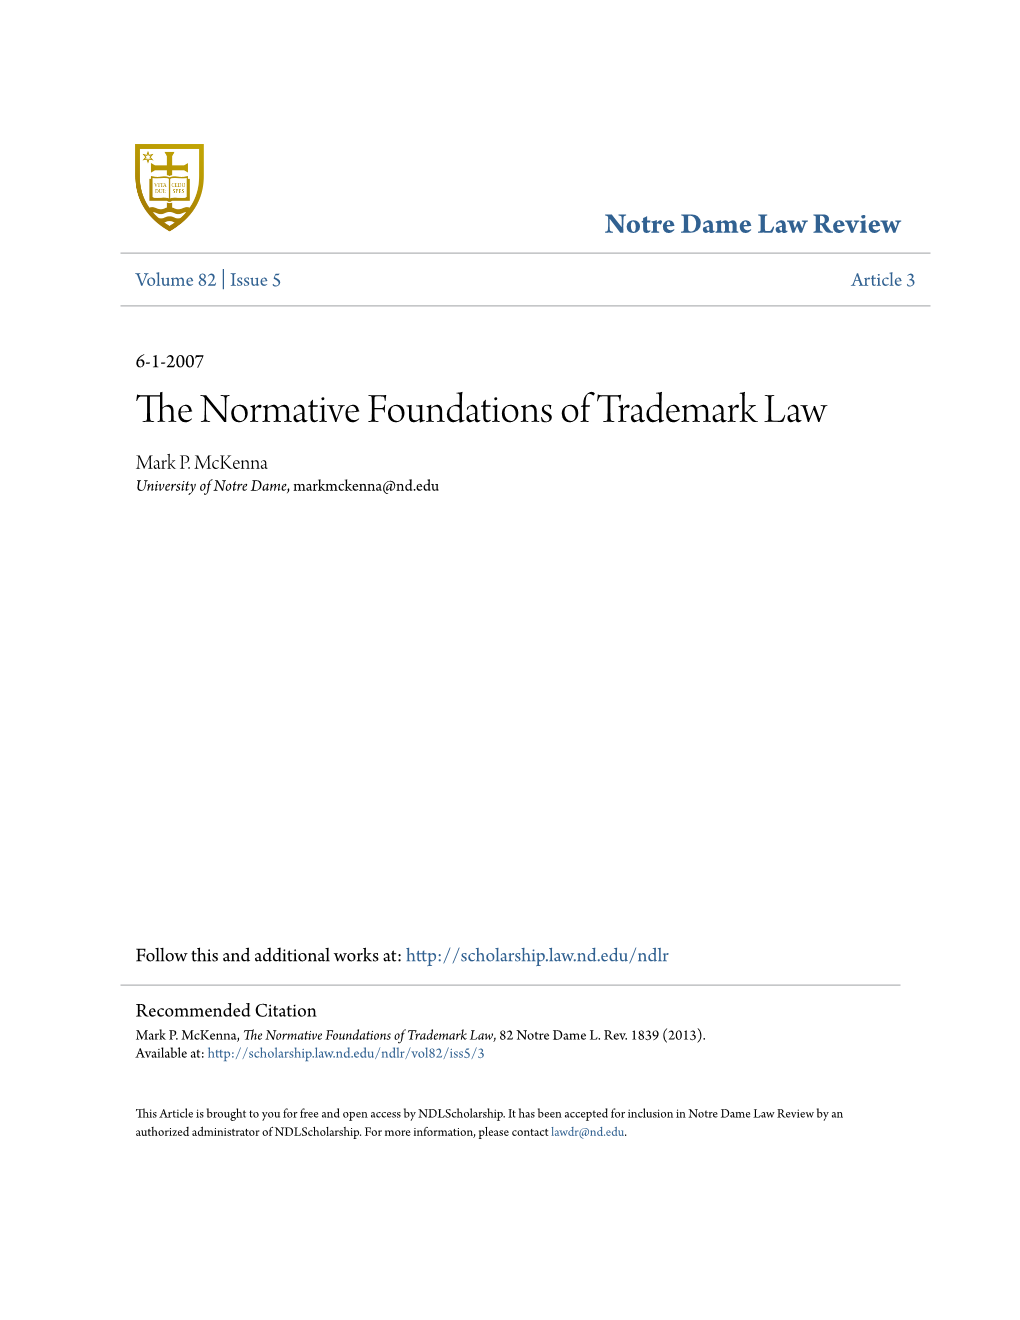 The Normative Foundations of Trademark Law, 82 Notre Dame L